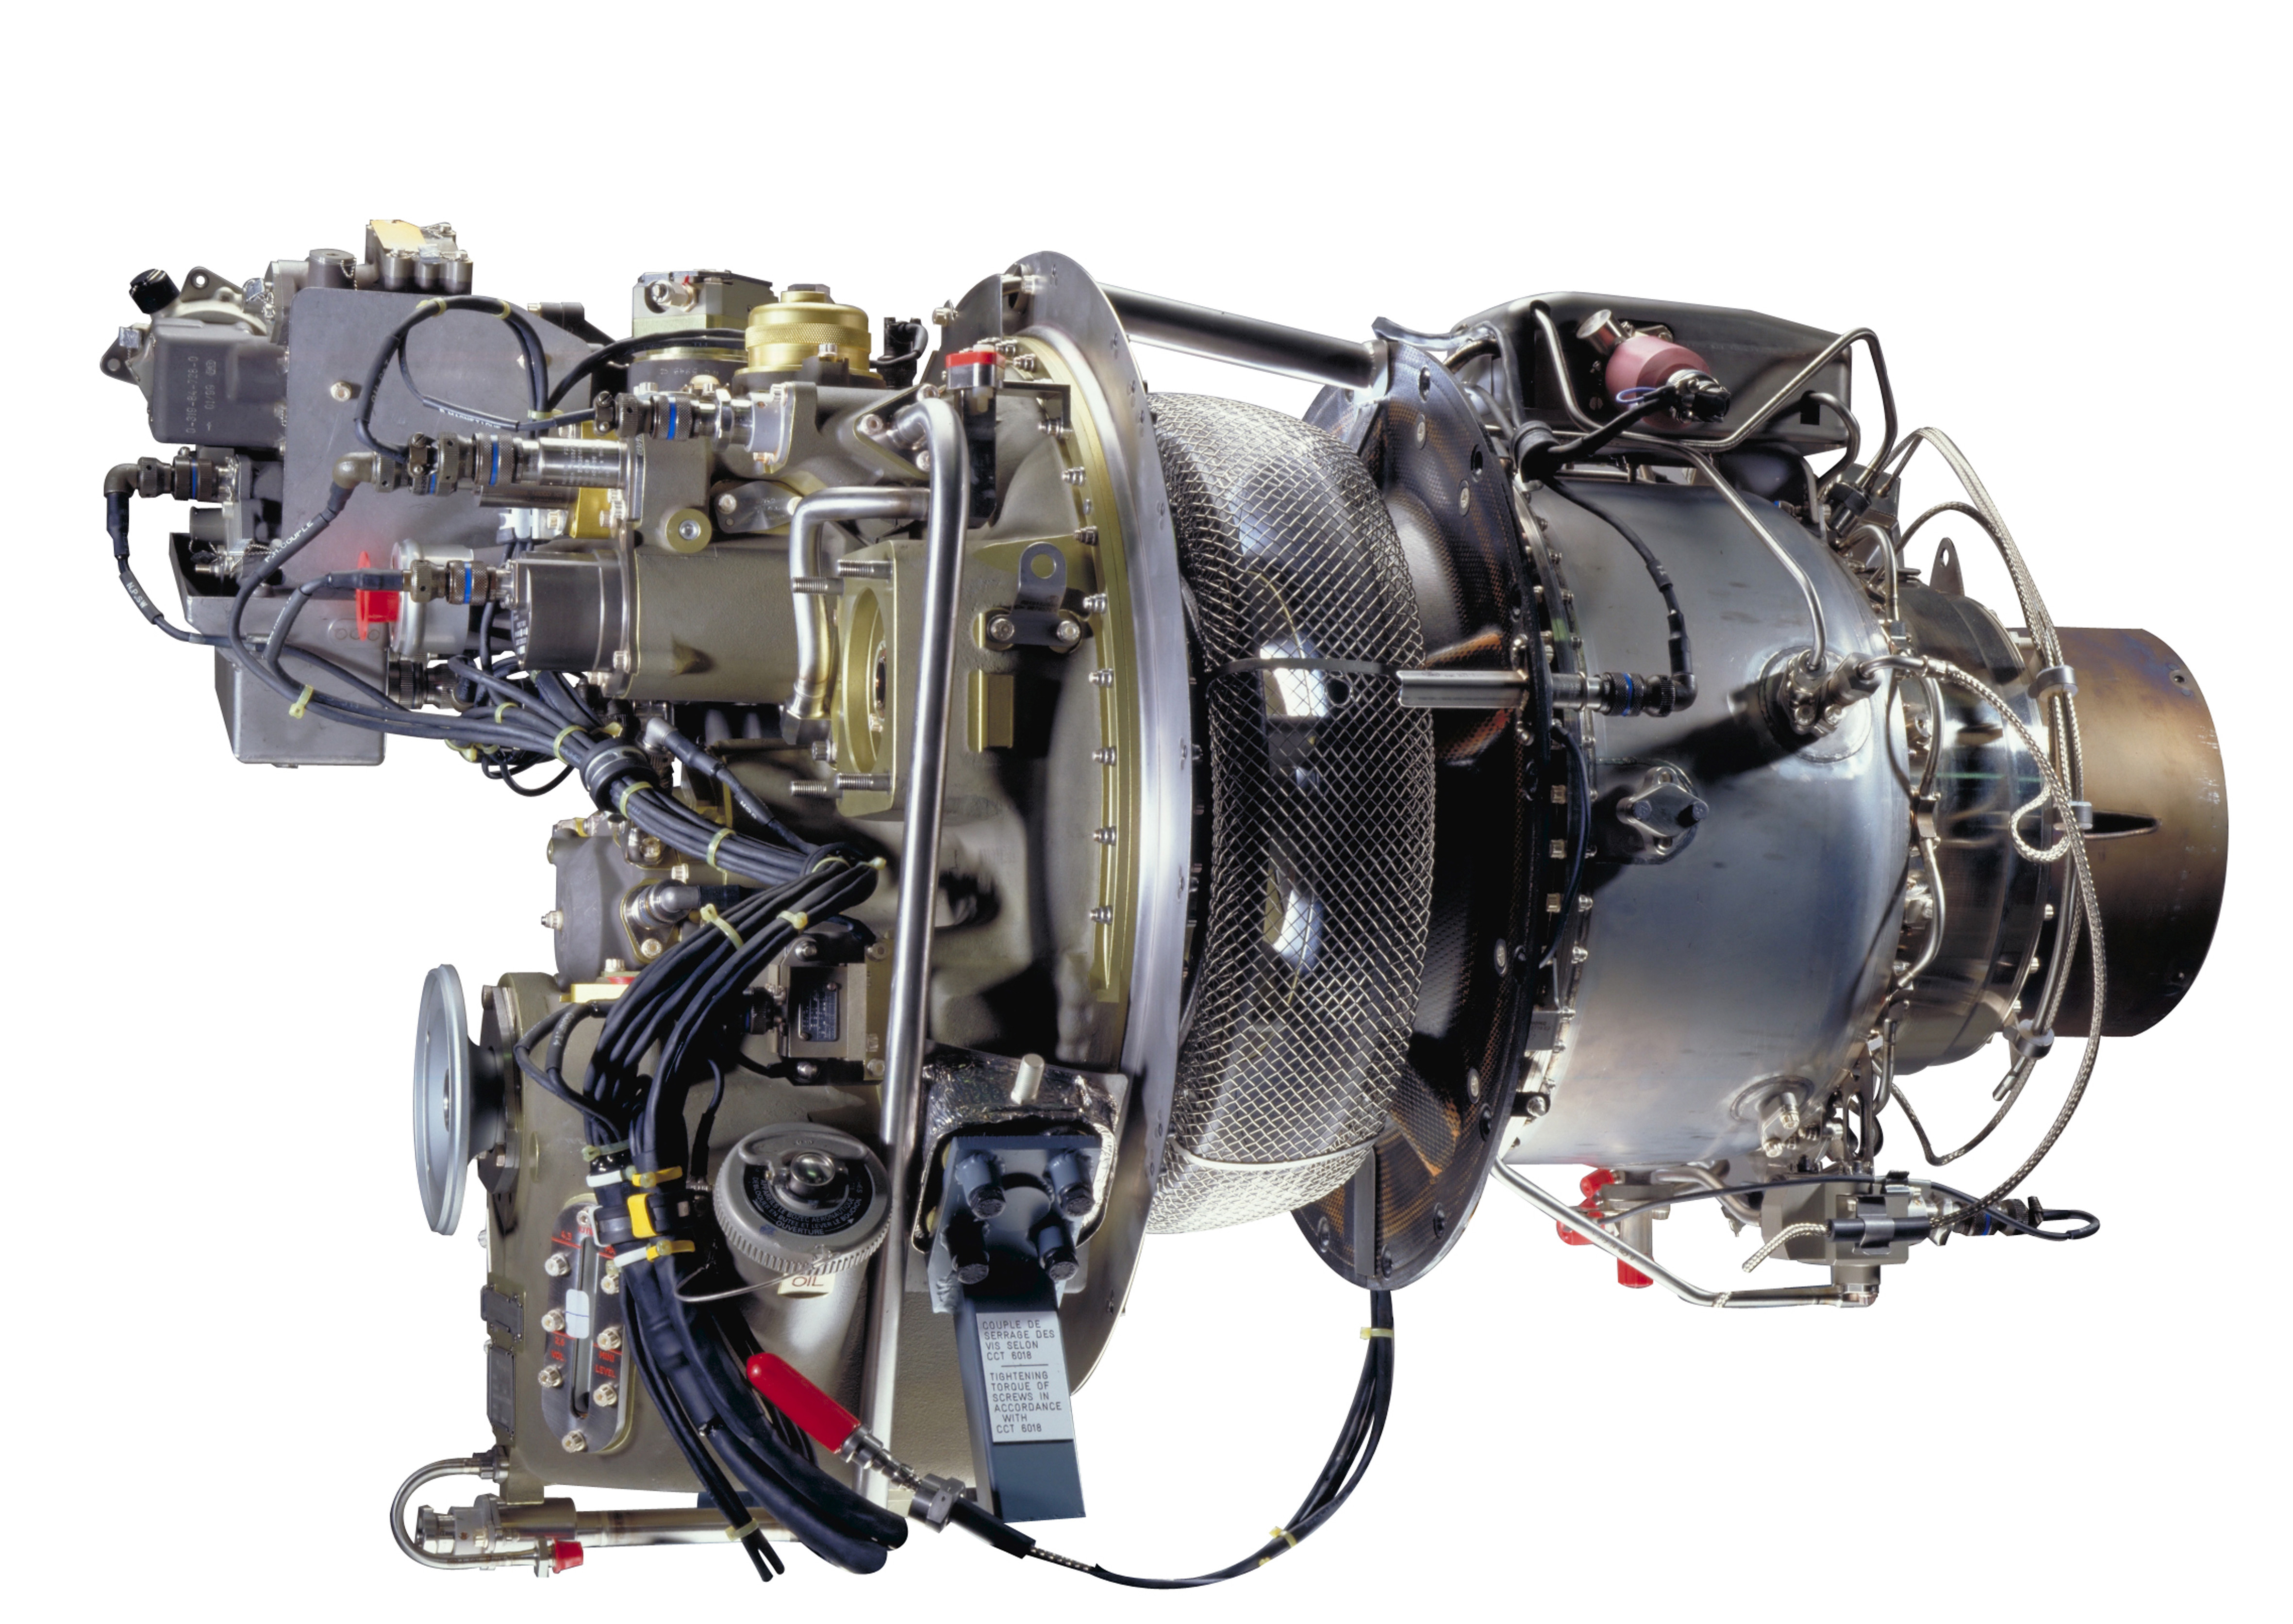 EUROPEAN ROTORS: Safran and Saab renewed their SBH® contract to support Swedish AW109 helicopter engines